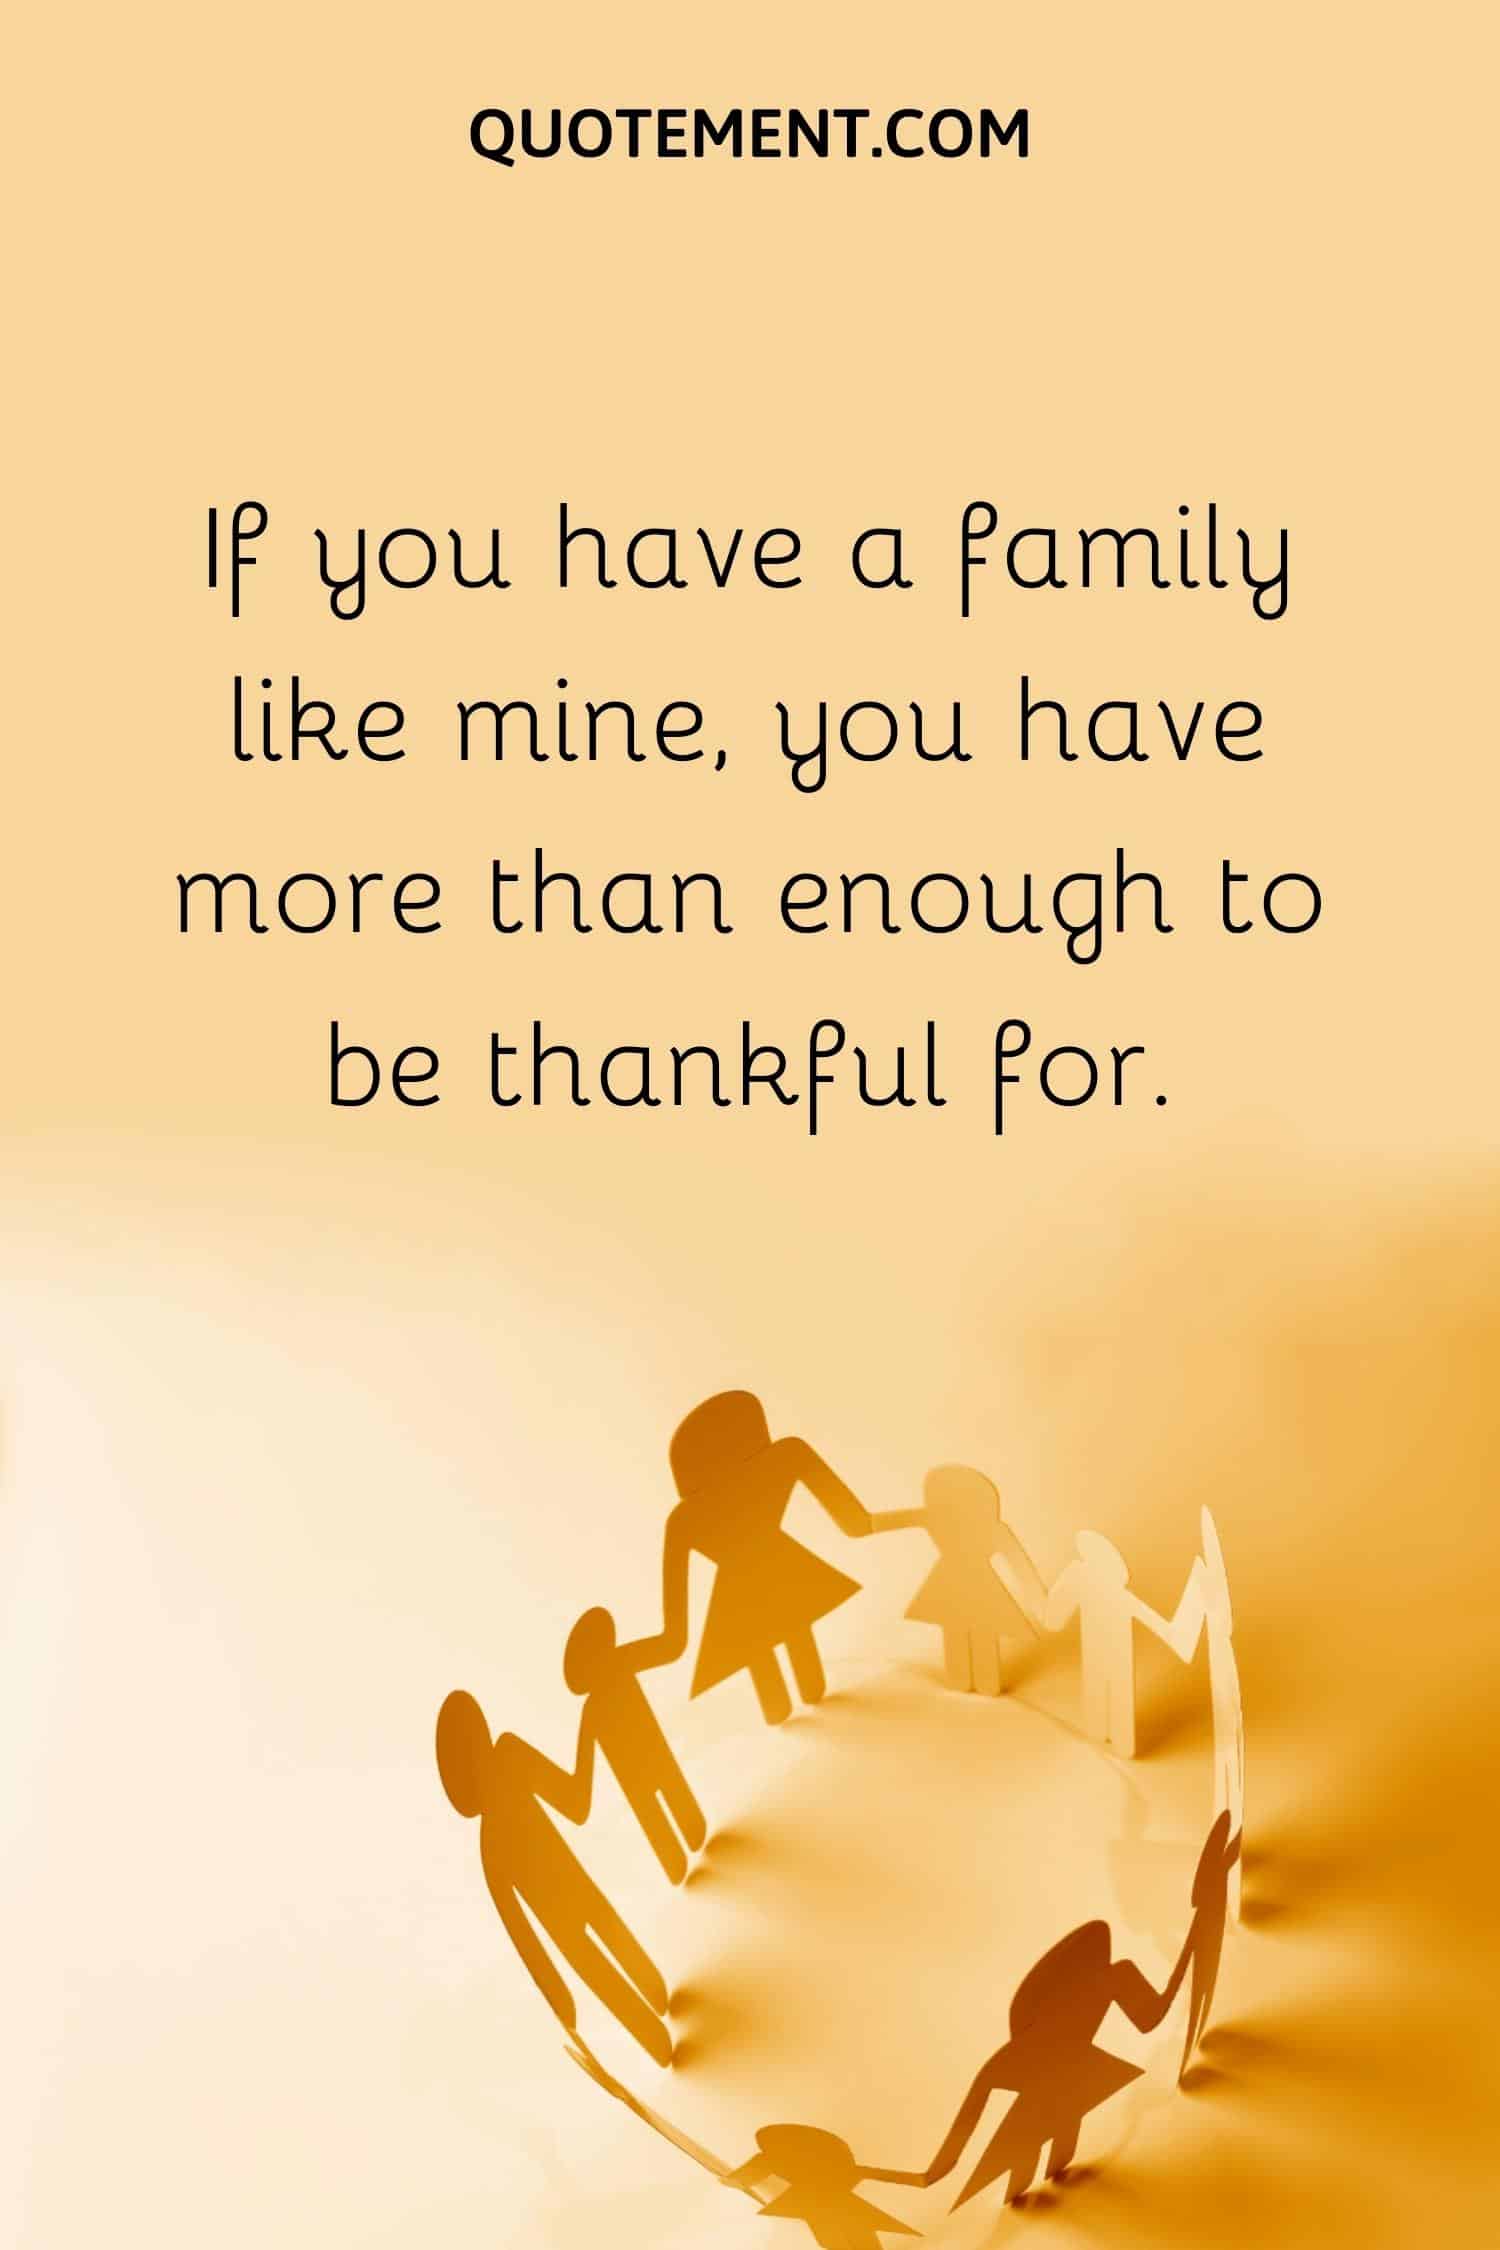 If you have a family like mine, you have more than enough to be thankful for.